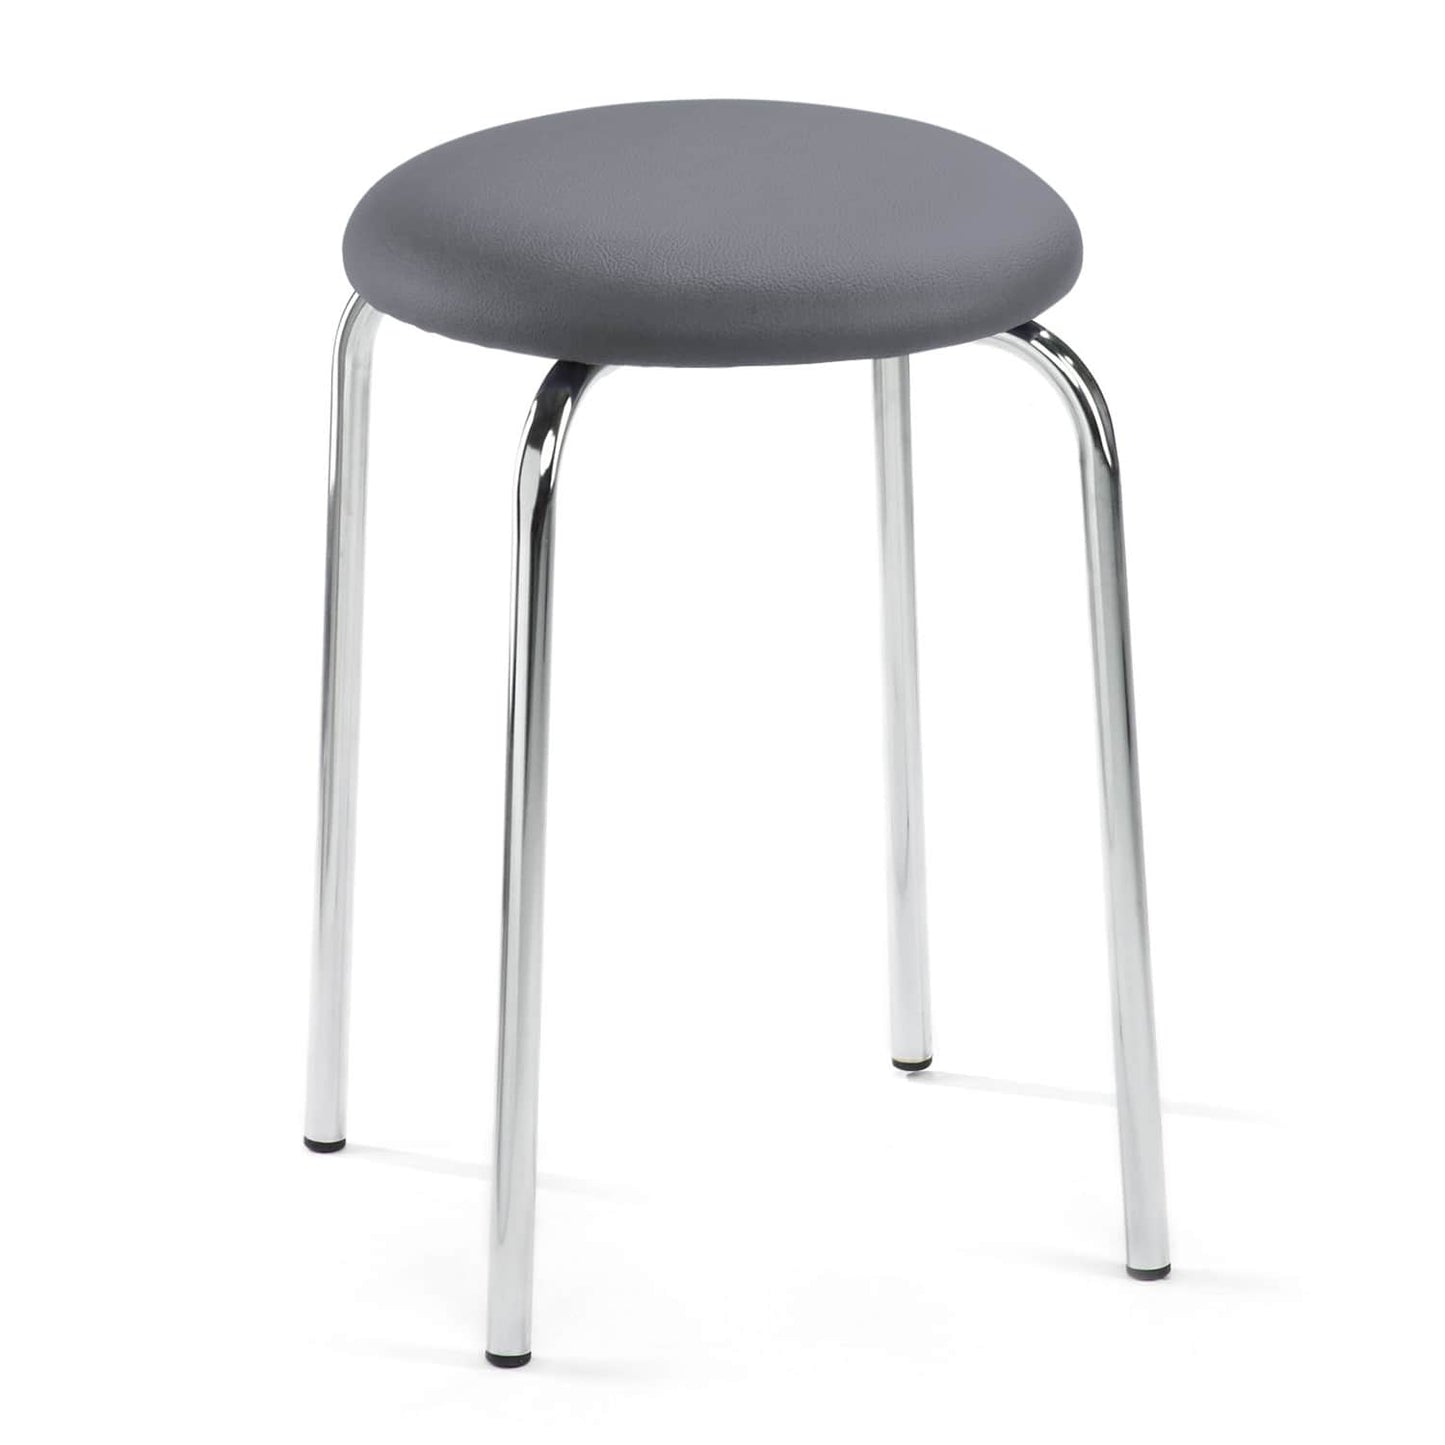 Stackable Stool With Leatherette Cover And Chrome-Plated Frame   Colour Variable